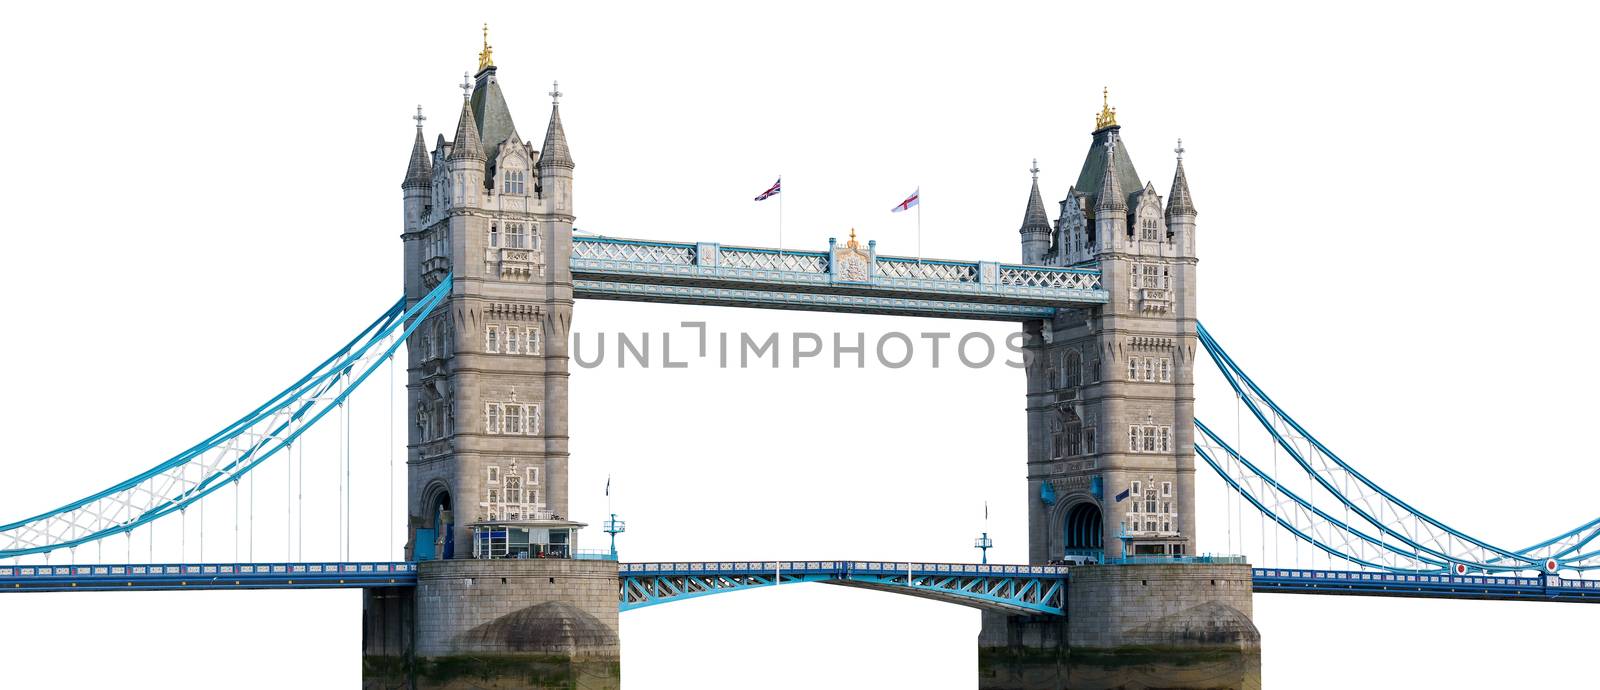 Tower Bridge in London isolated on white background by mkos83